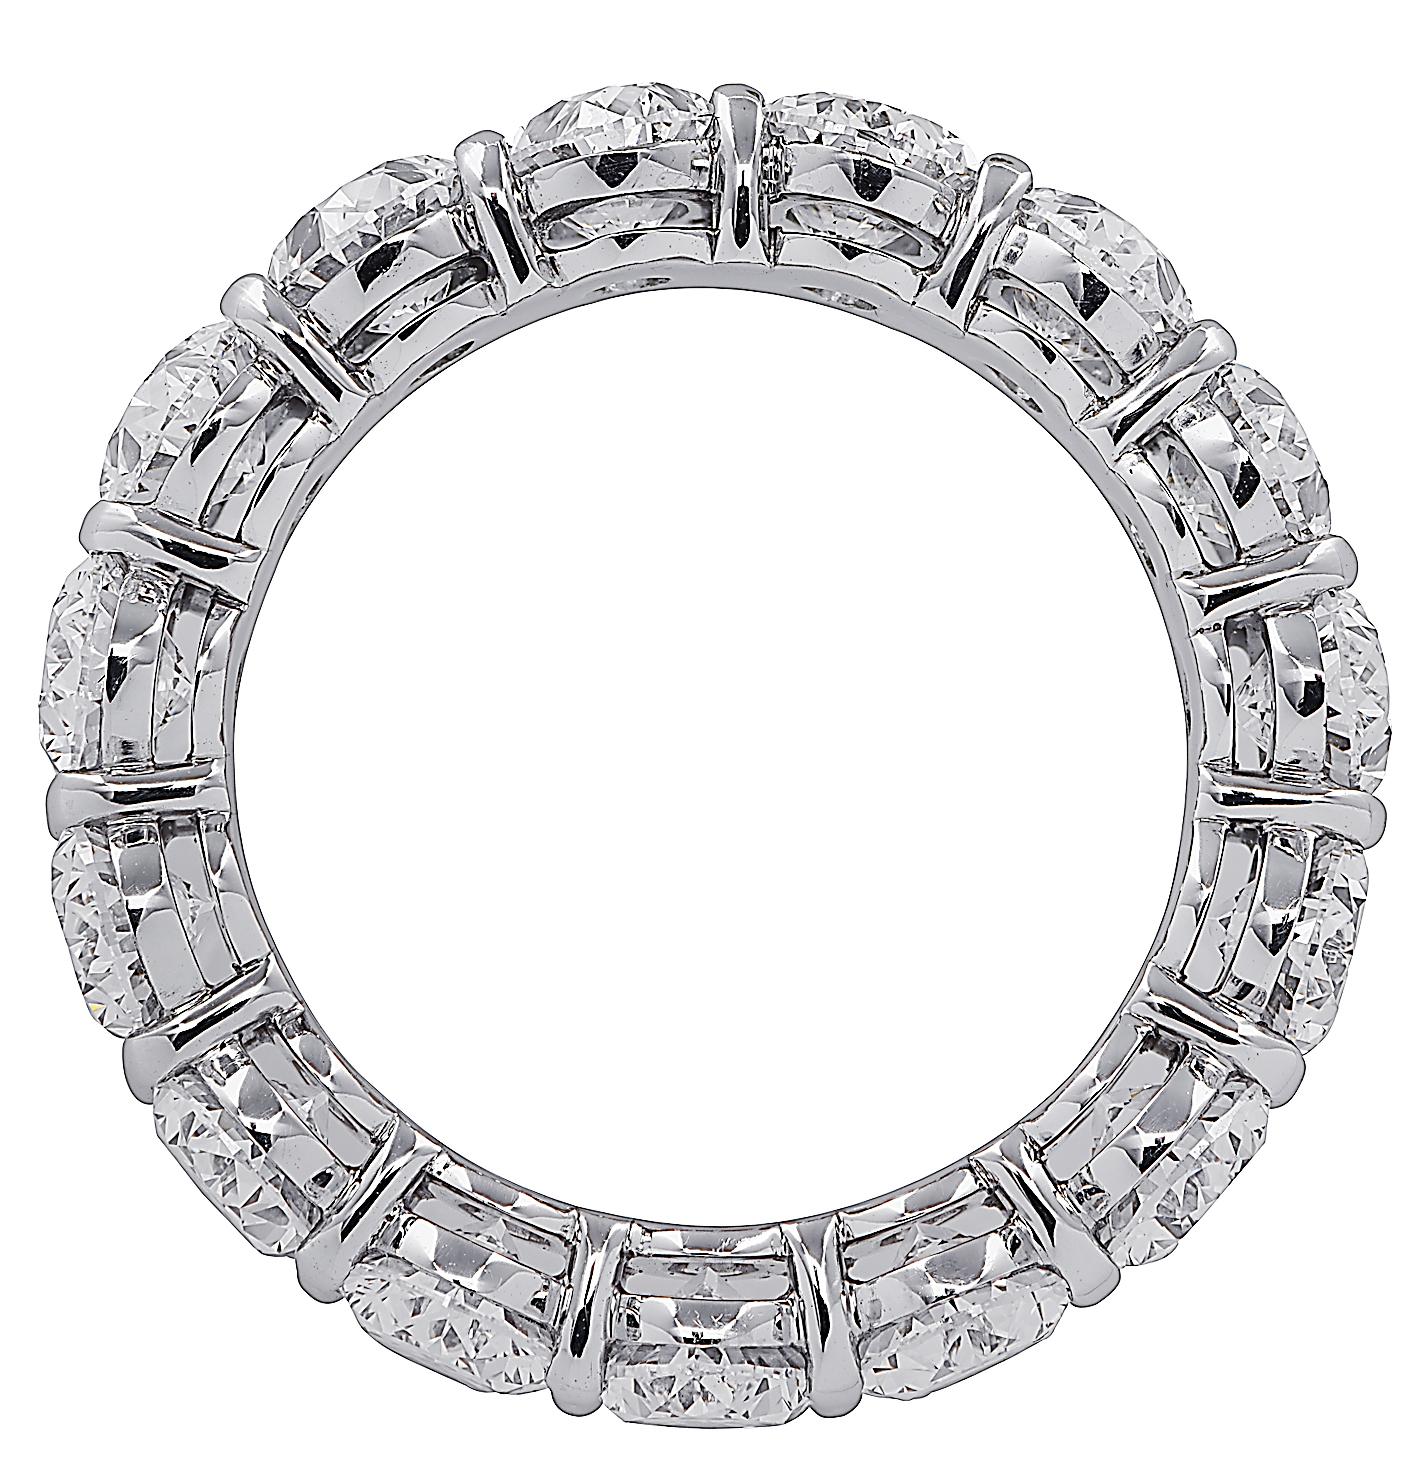 Exquisite Vivid Diamonds eternity band crafted in Platinum, showcasing 18 stunning oval cut diamonds weighing 3.9 carats total, E-F color, VVS-VS clarity. Each diamond is carefully selected, perfectly matched and set in a seamless sea of eternity,